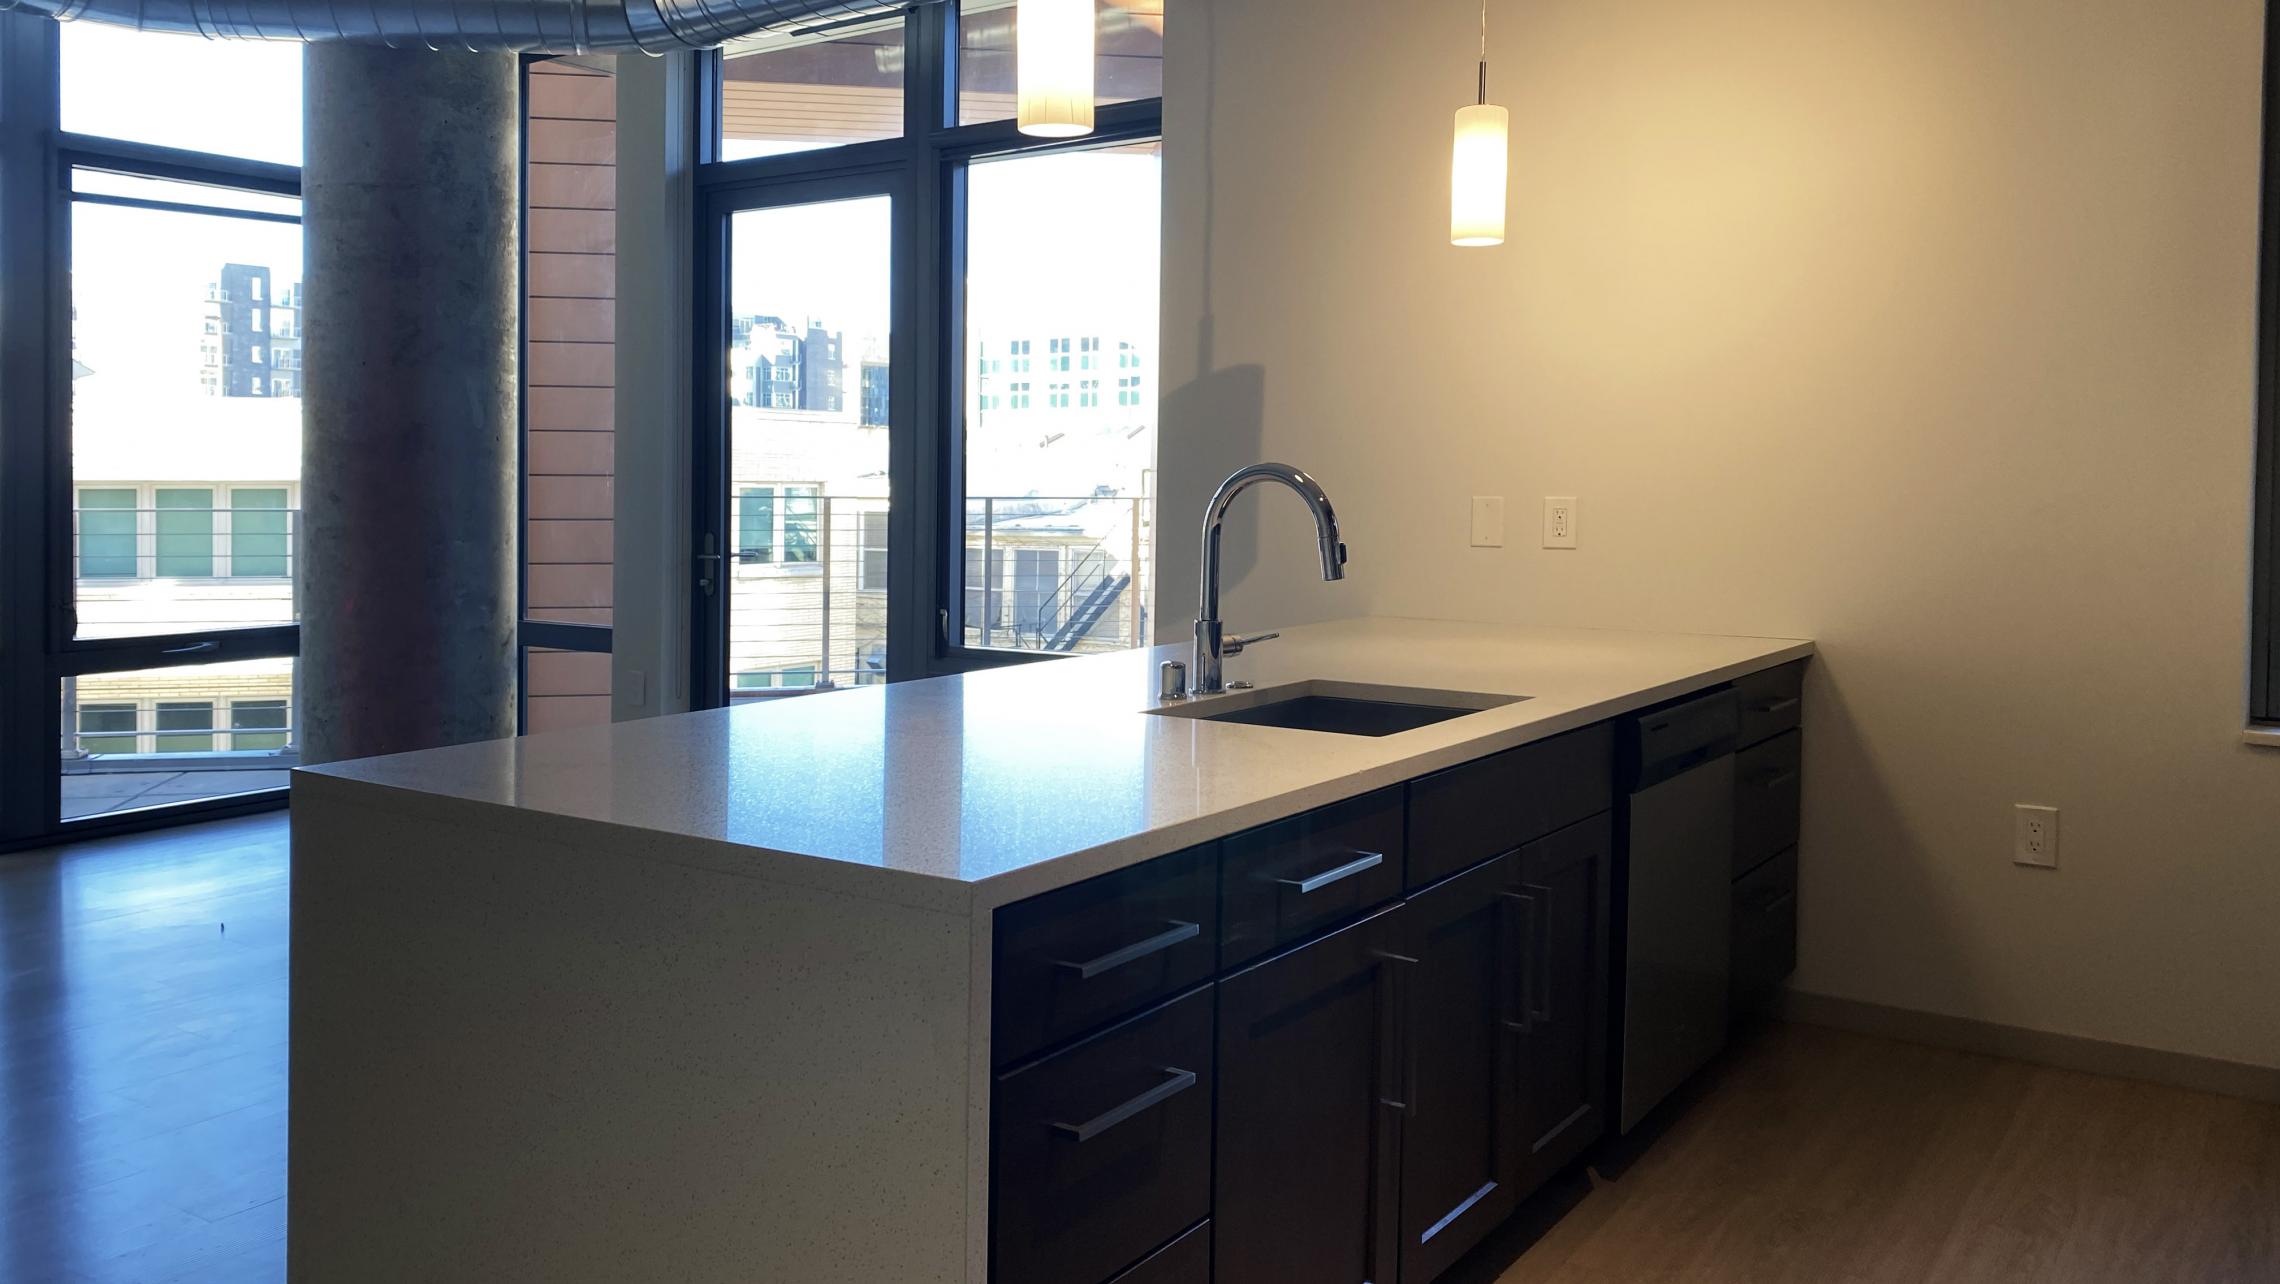 The-Pressman-Apartment-312-Two-Bedroom-One-Bath-ADA-Upscale-Luxurious-Modern-Exposed-Duct-Concrete-Capitol-Square-Downtown-Madison-Balcony-Terrace-Pets-Fitness-Lounge-Grill-Lifestyle